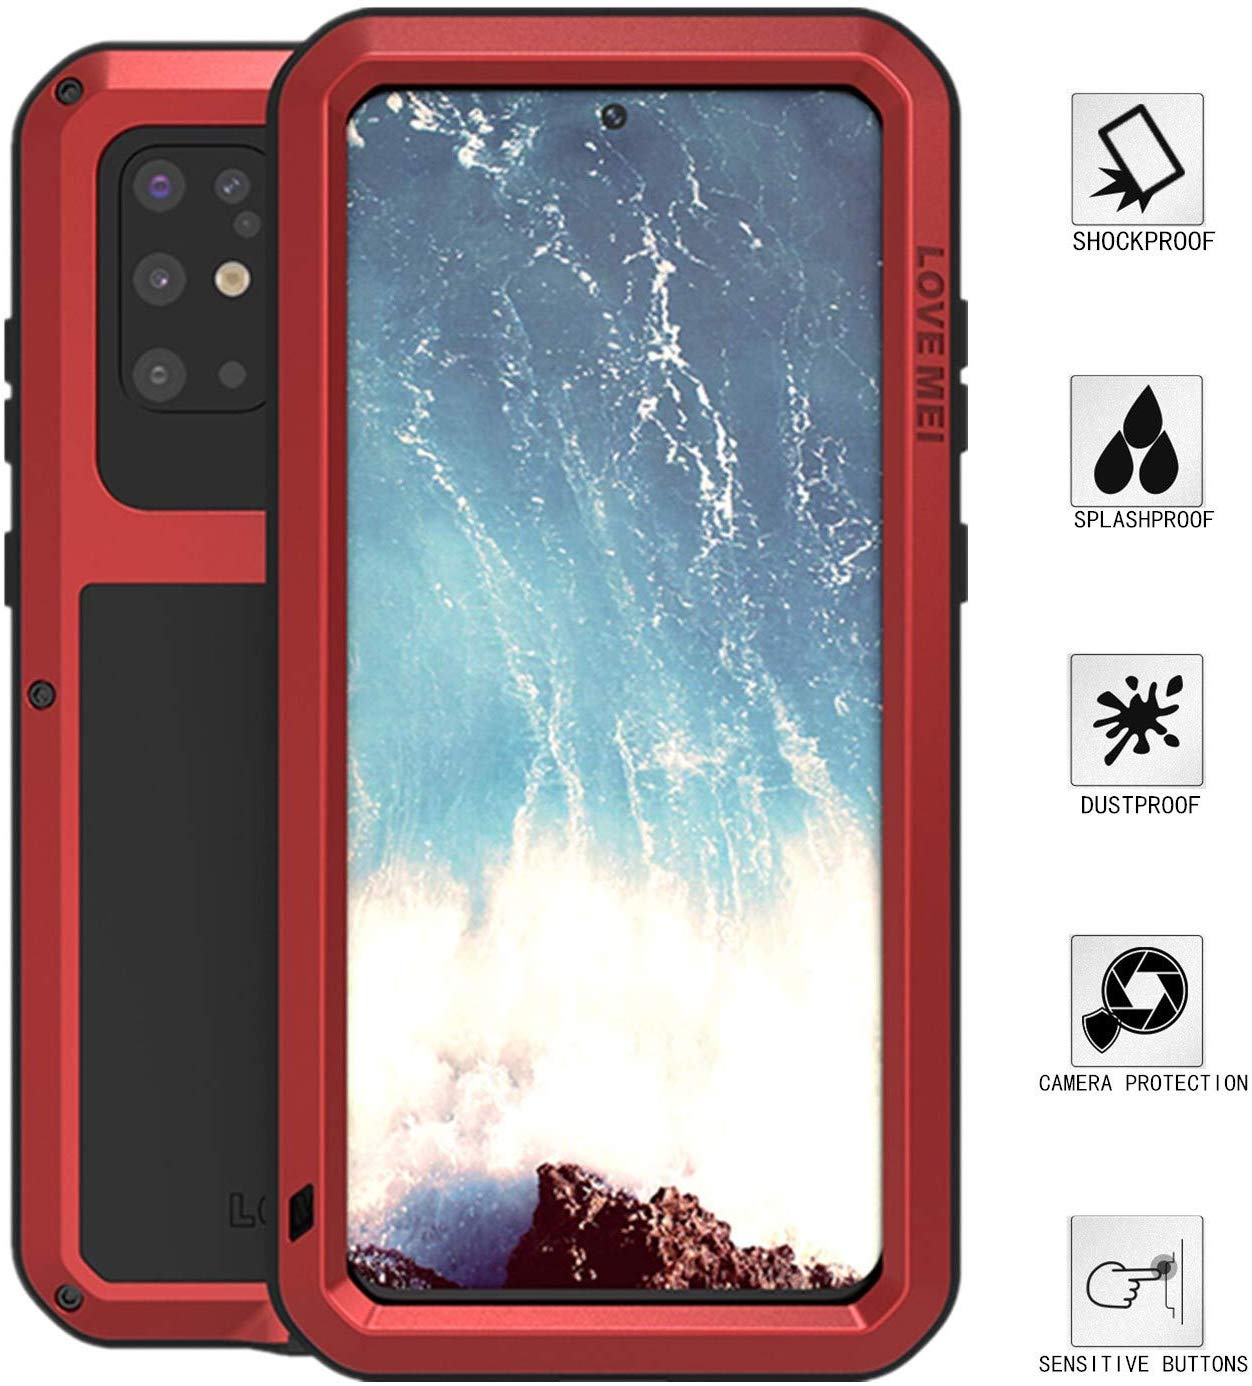 High Quality Aluminum Metal Gorilla Glass Waterproof Shockproof Military Heavy Duty Sturdy Protector Cover Hard Case For Samsung Galaxy S20 Plus